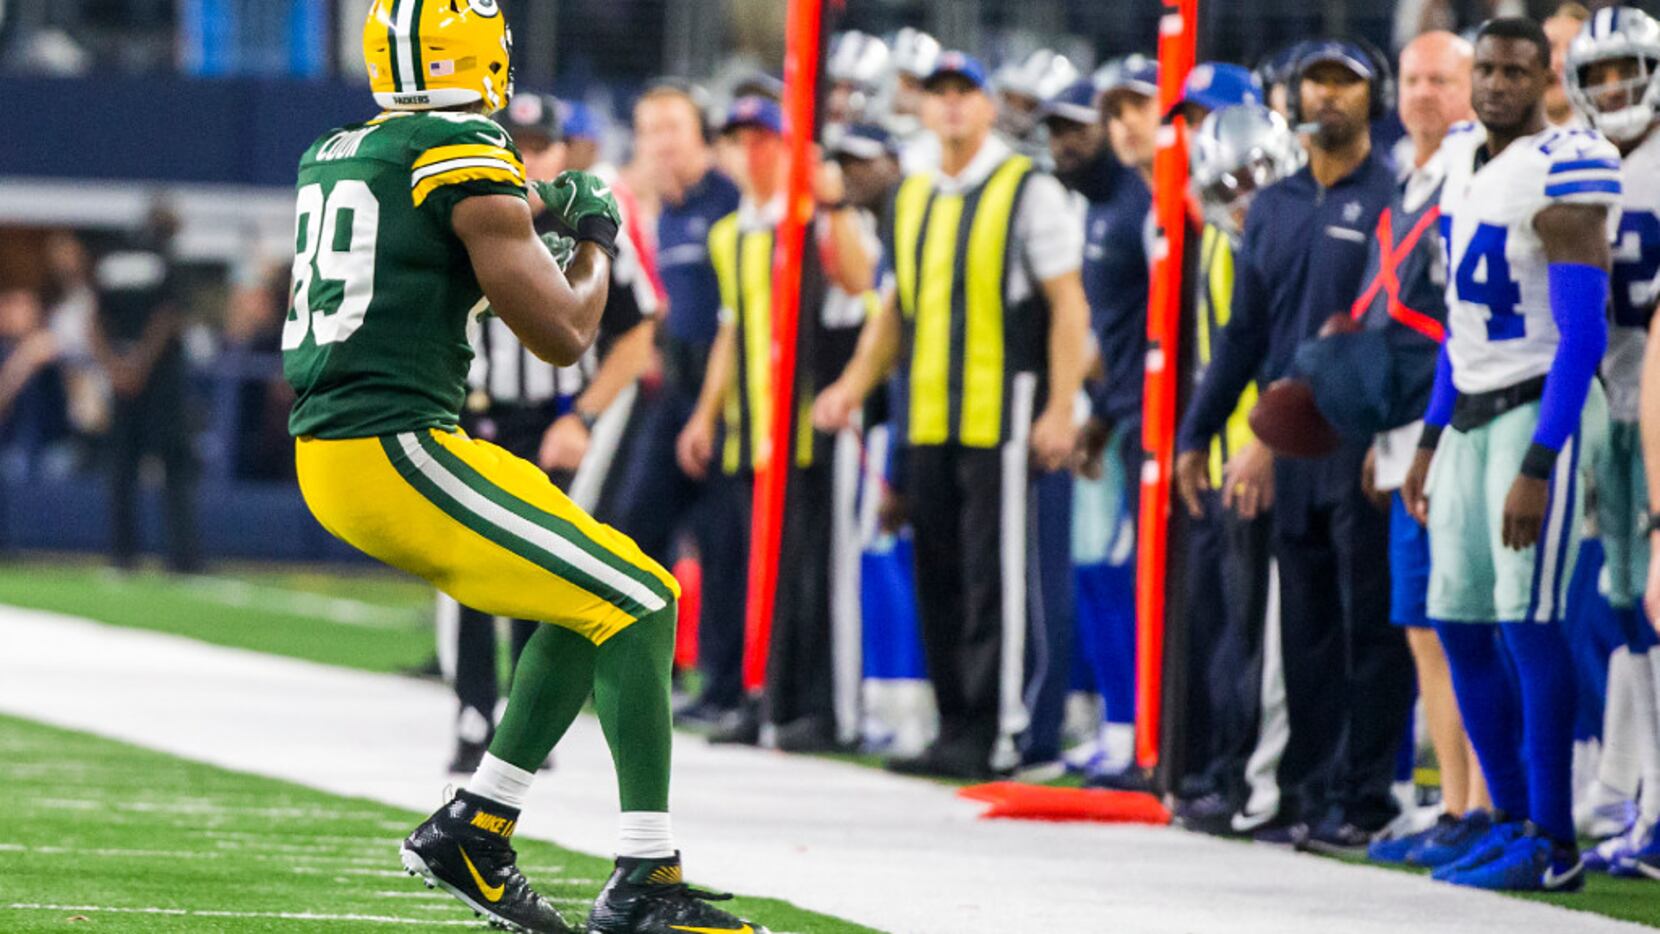 Sturm: Where Packers game got away from Cowboys, and what